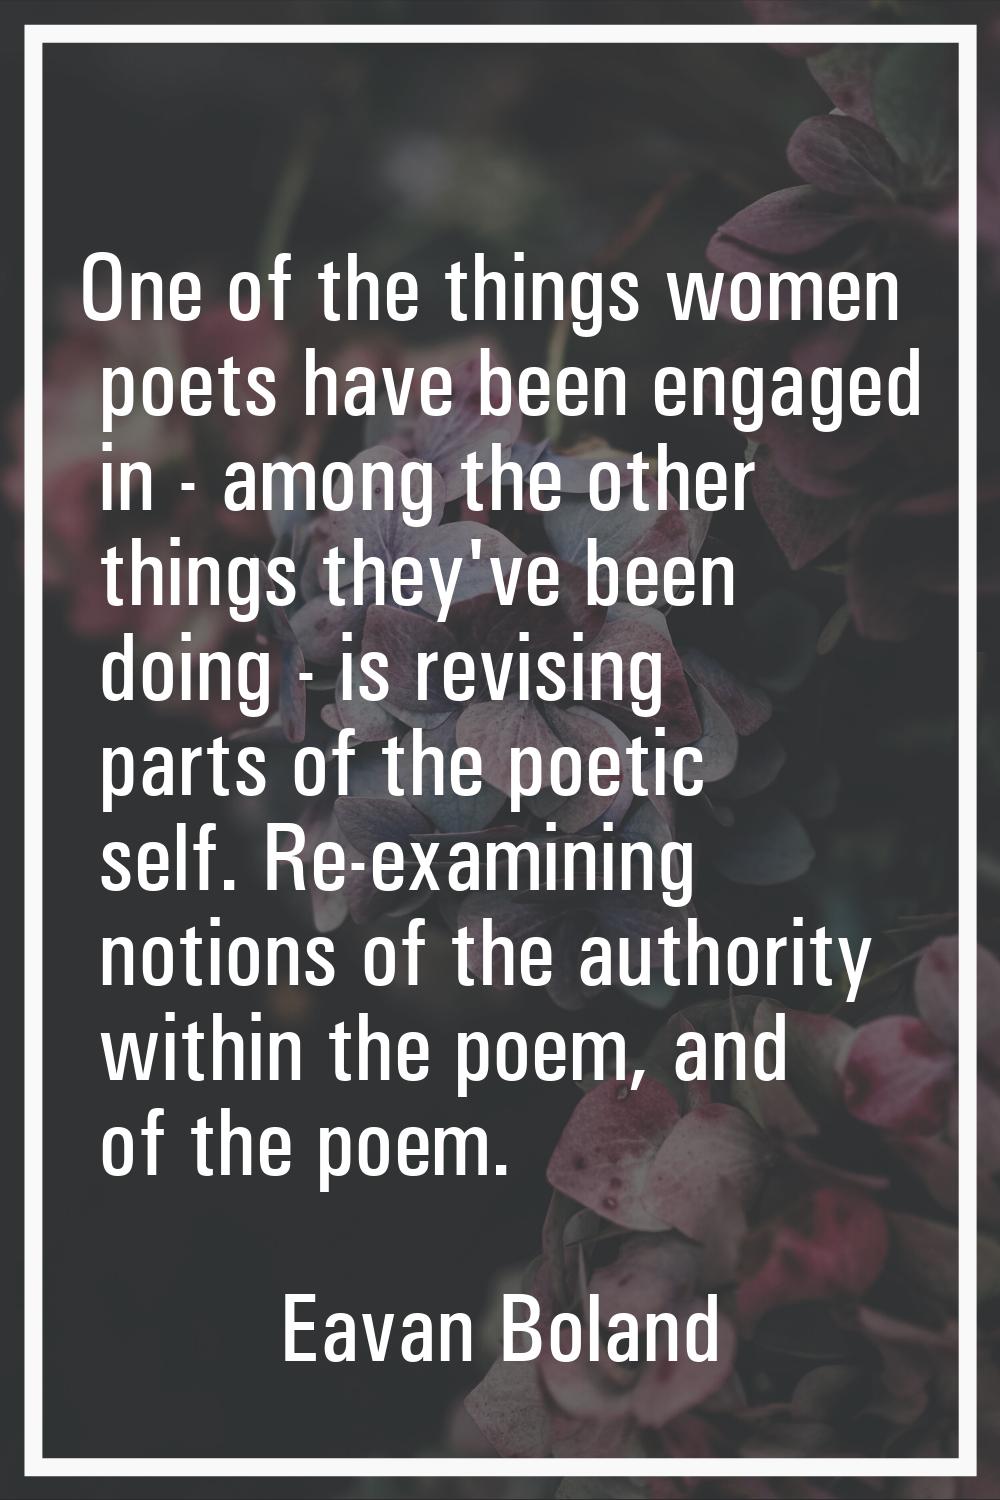 One of the things women poets have been engaged in - among the other things they've been doing - is